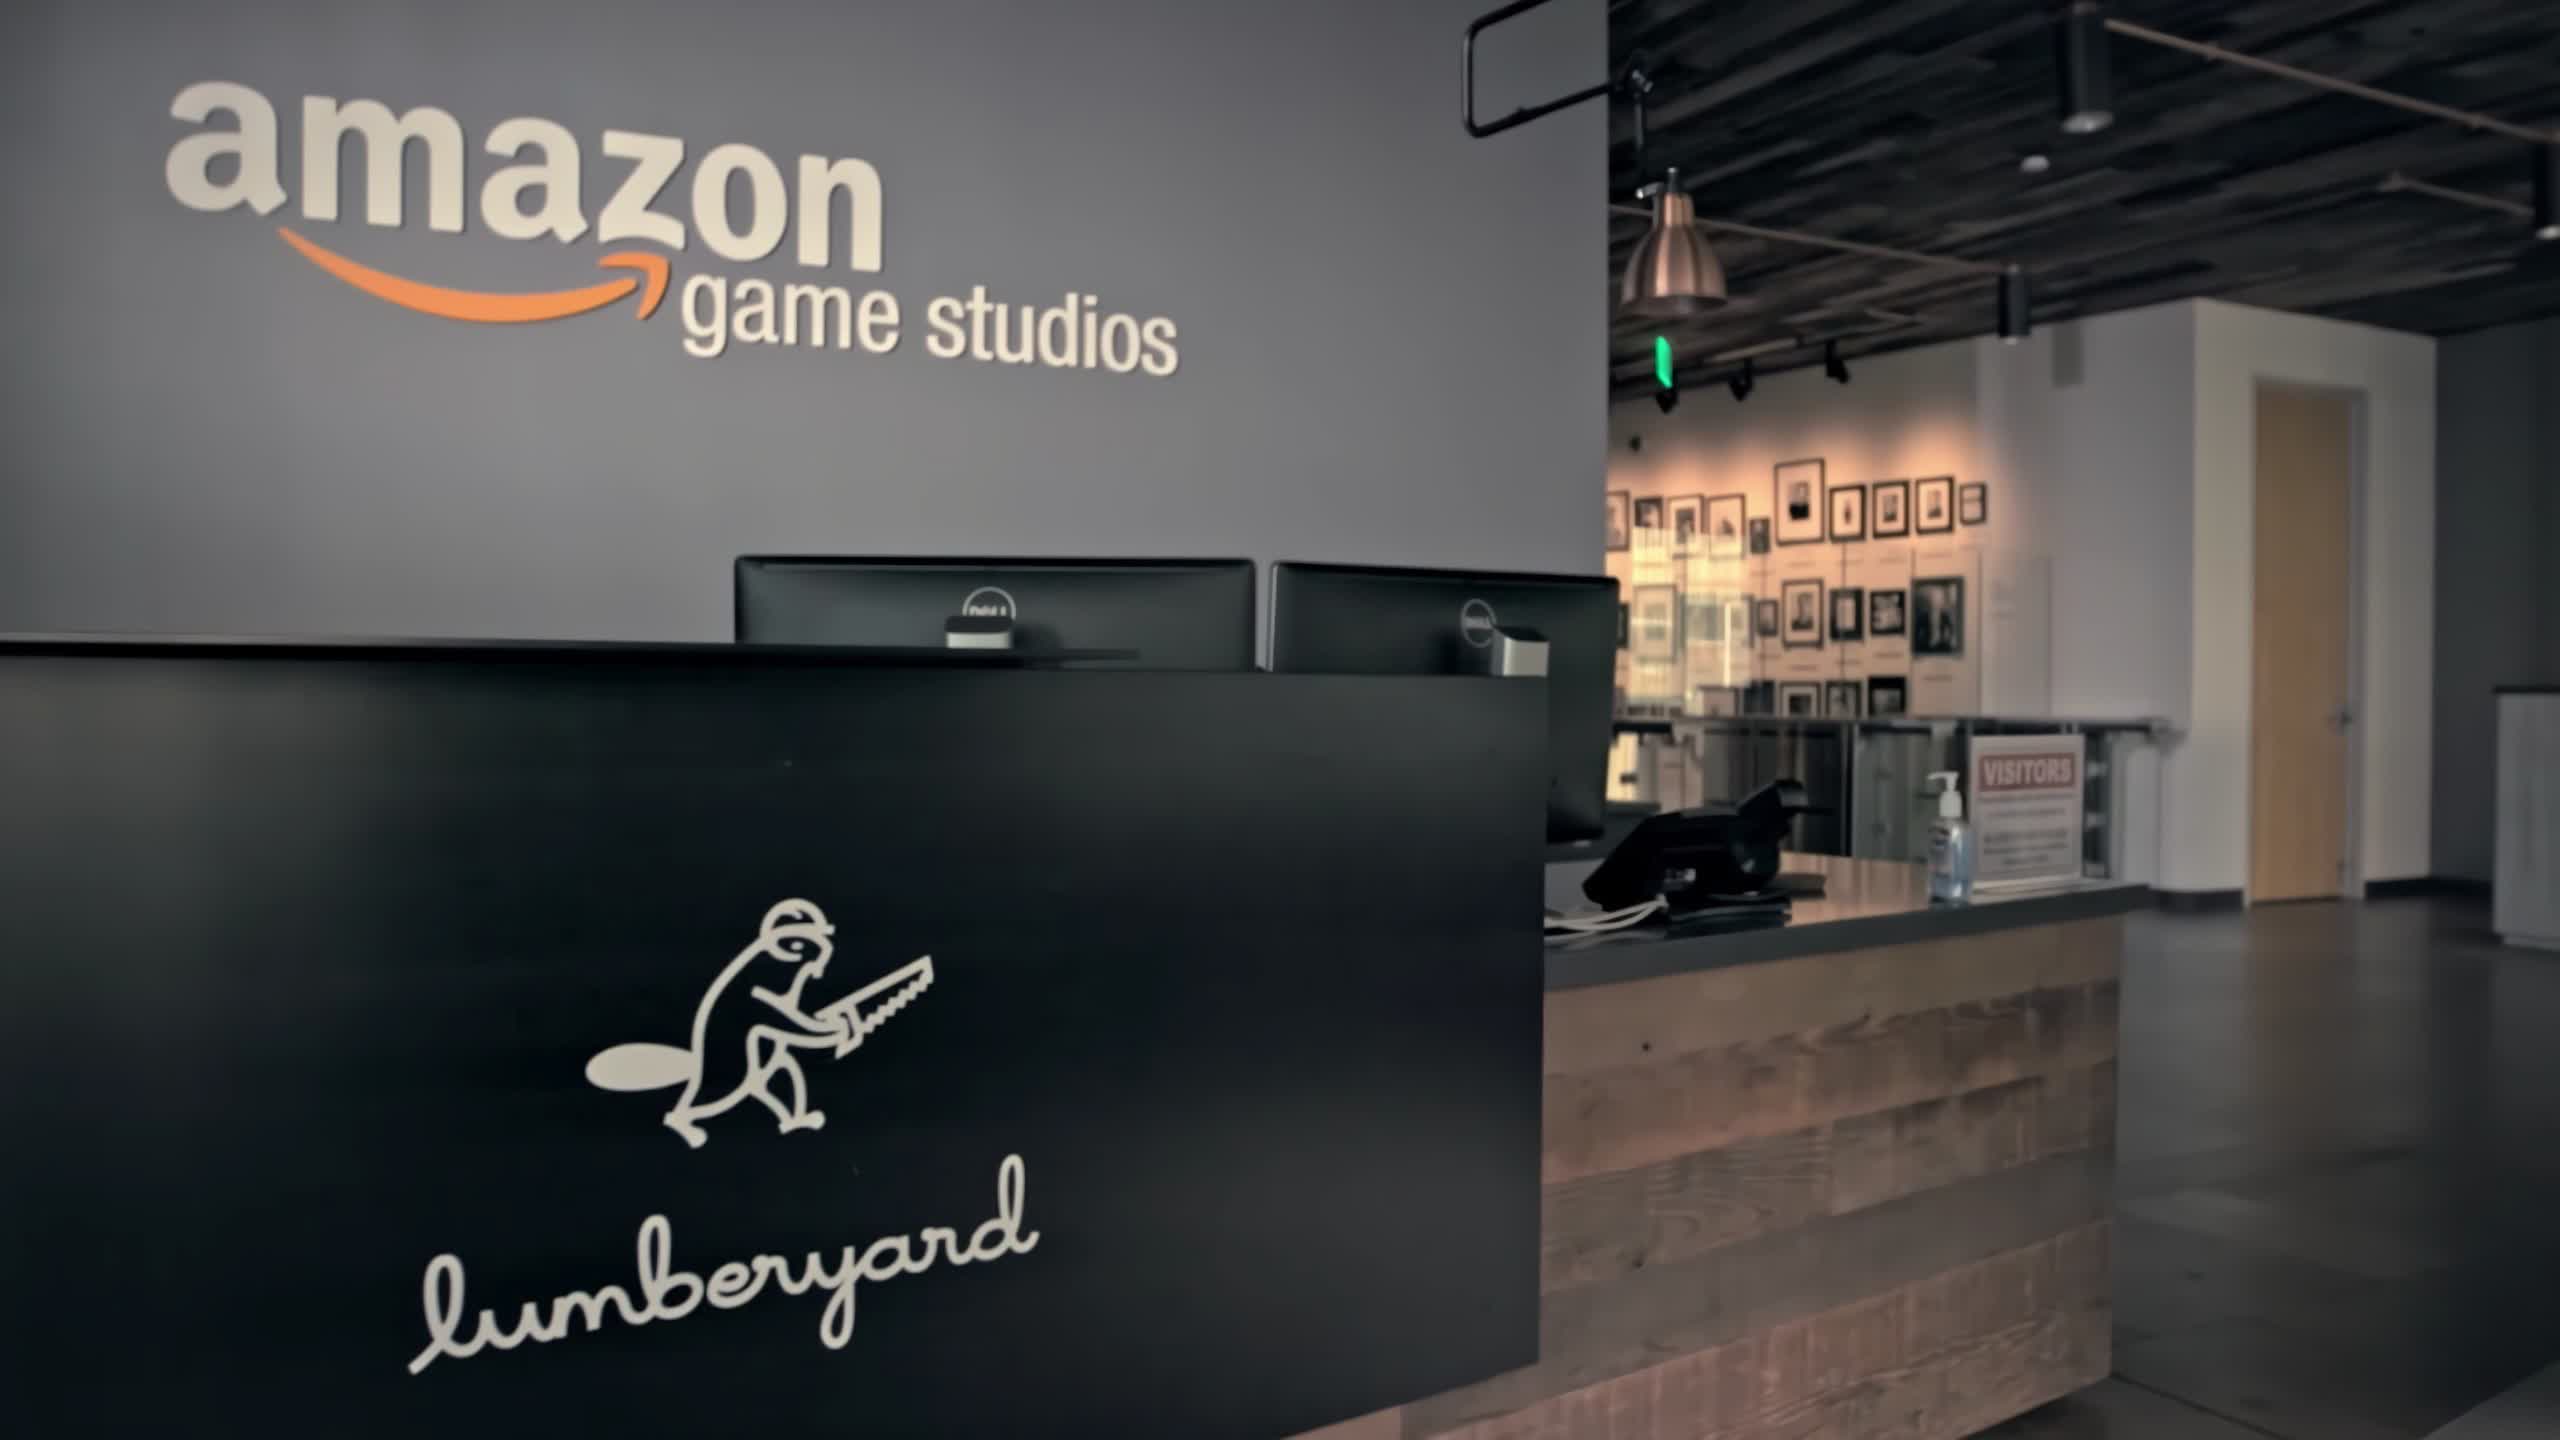 Amazon Games Studios has stopped laying claim to its employees' independently created games